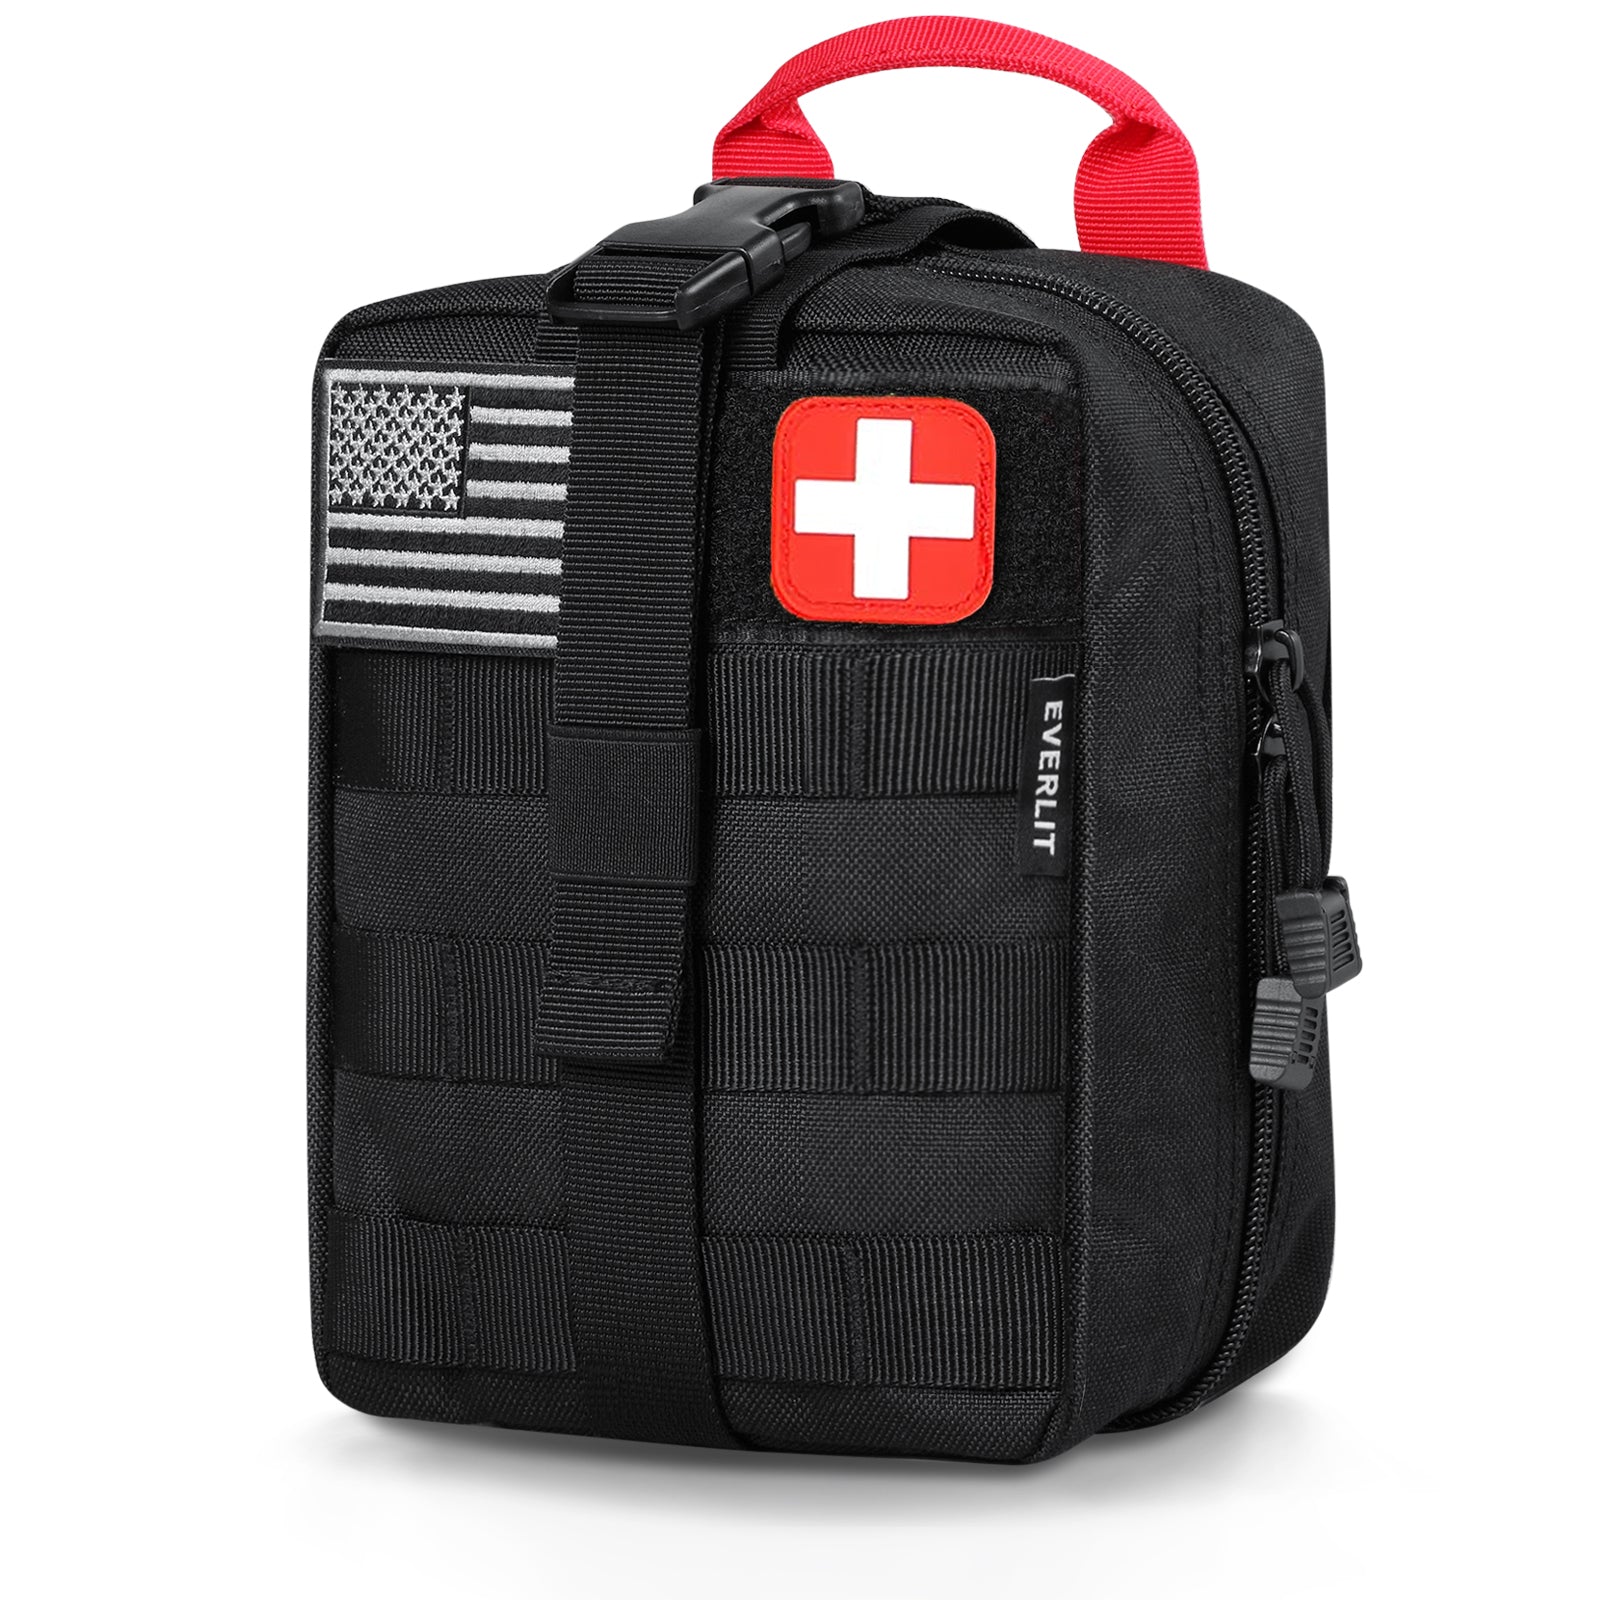 ESSENTIAL<br> SURVIVAL FIRST AID KIT